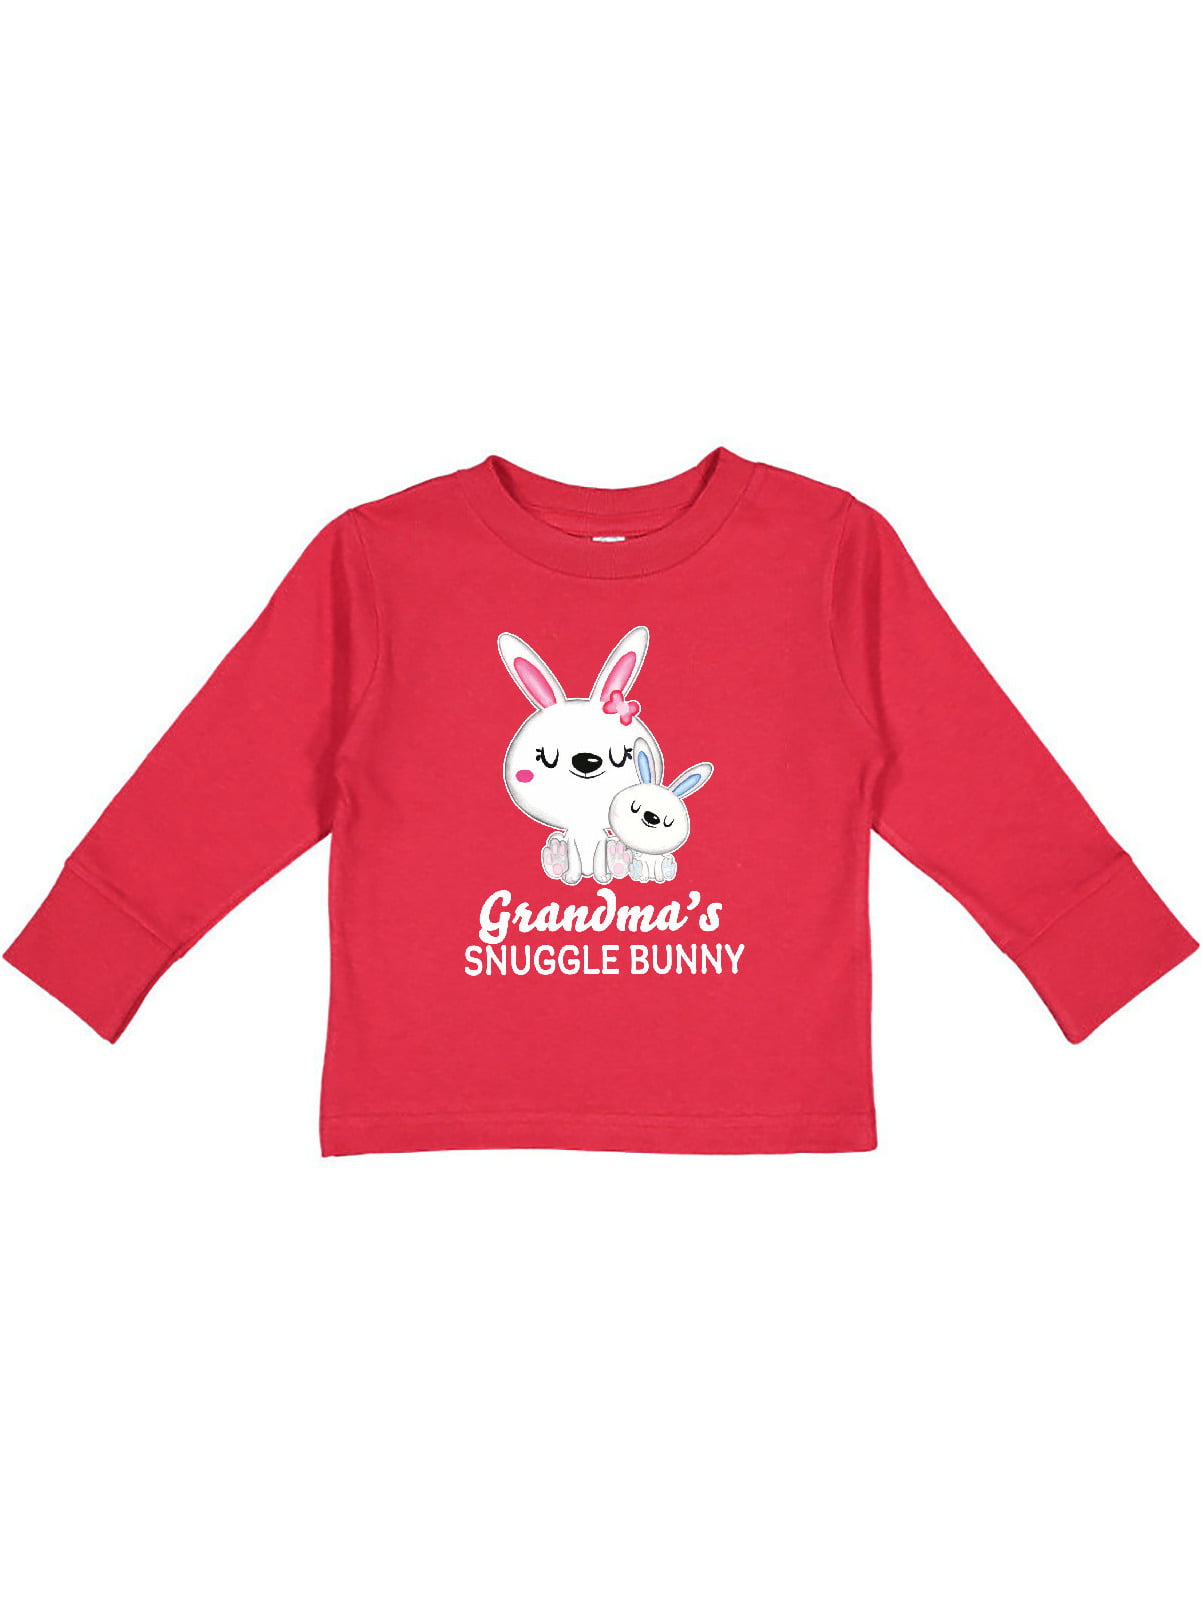 inktastic Great Aunts Snuggle Bunny Easter Toddler Long Sleeve T-Shirt 